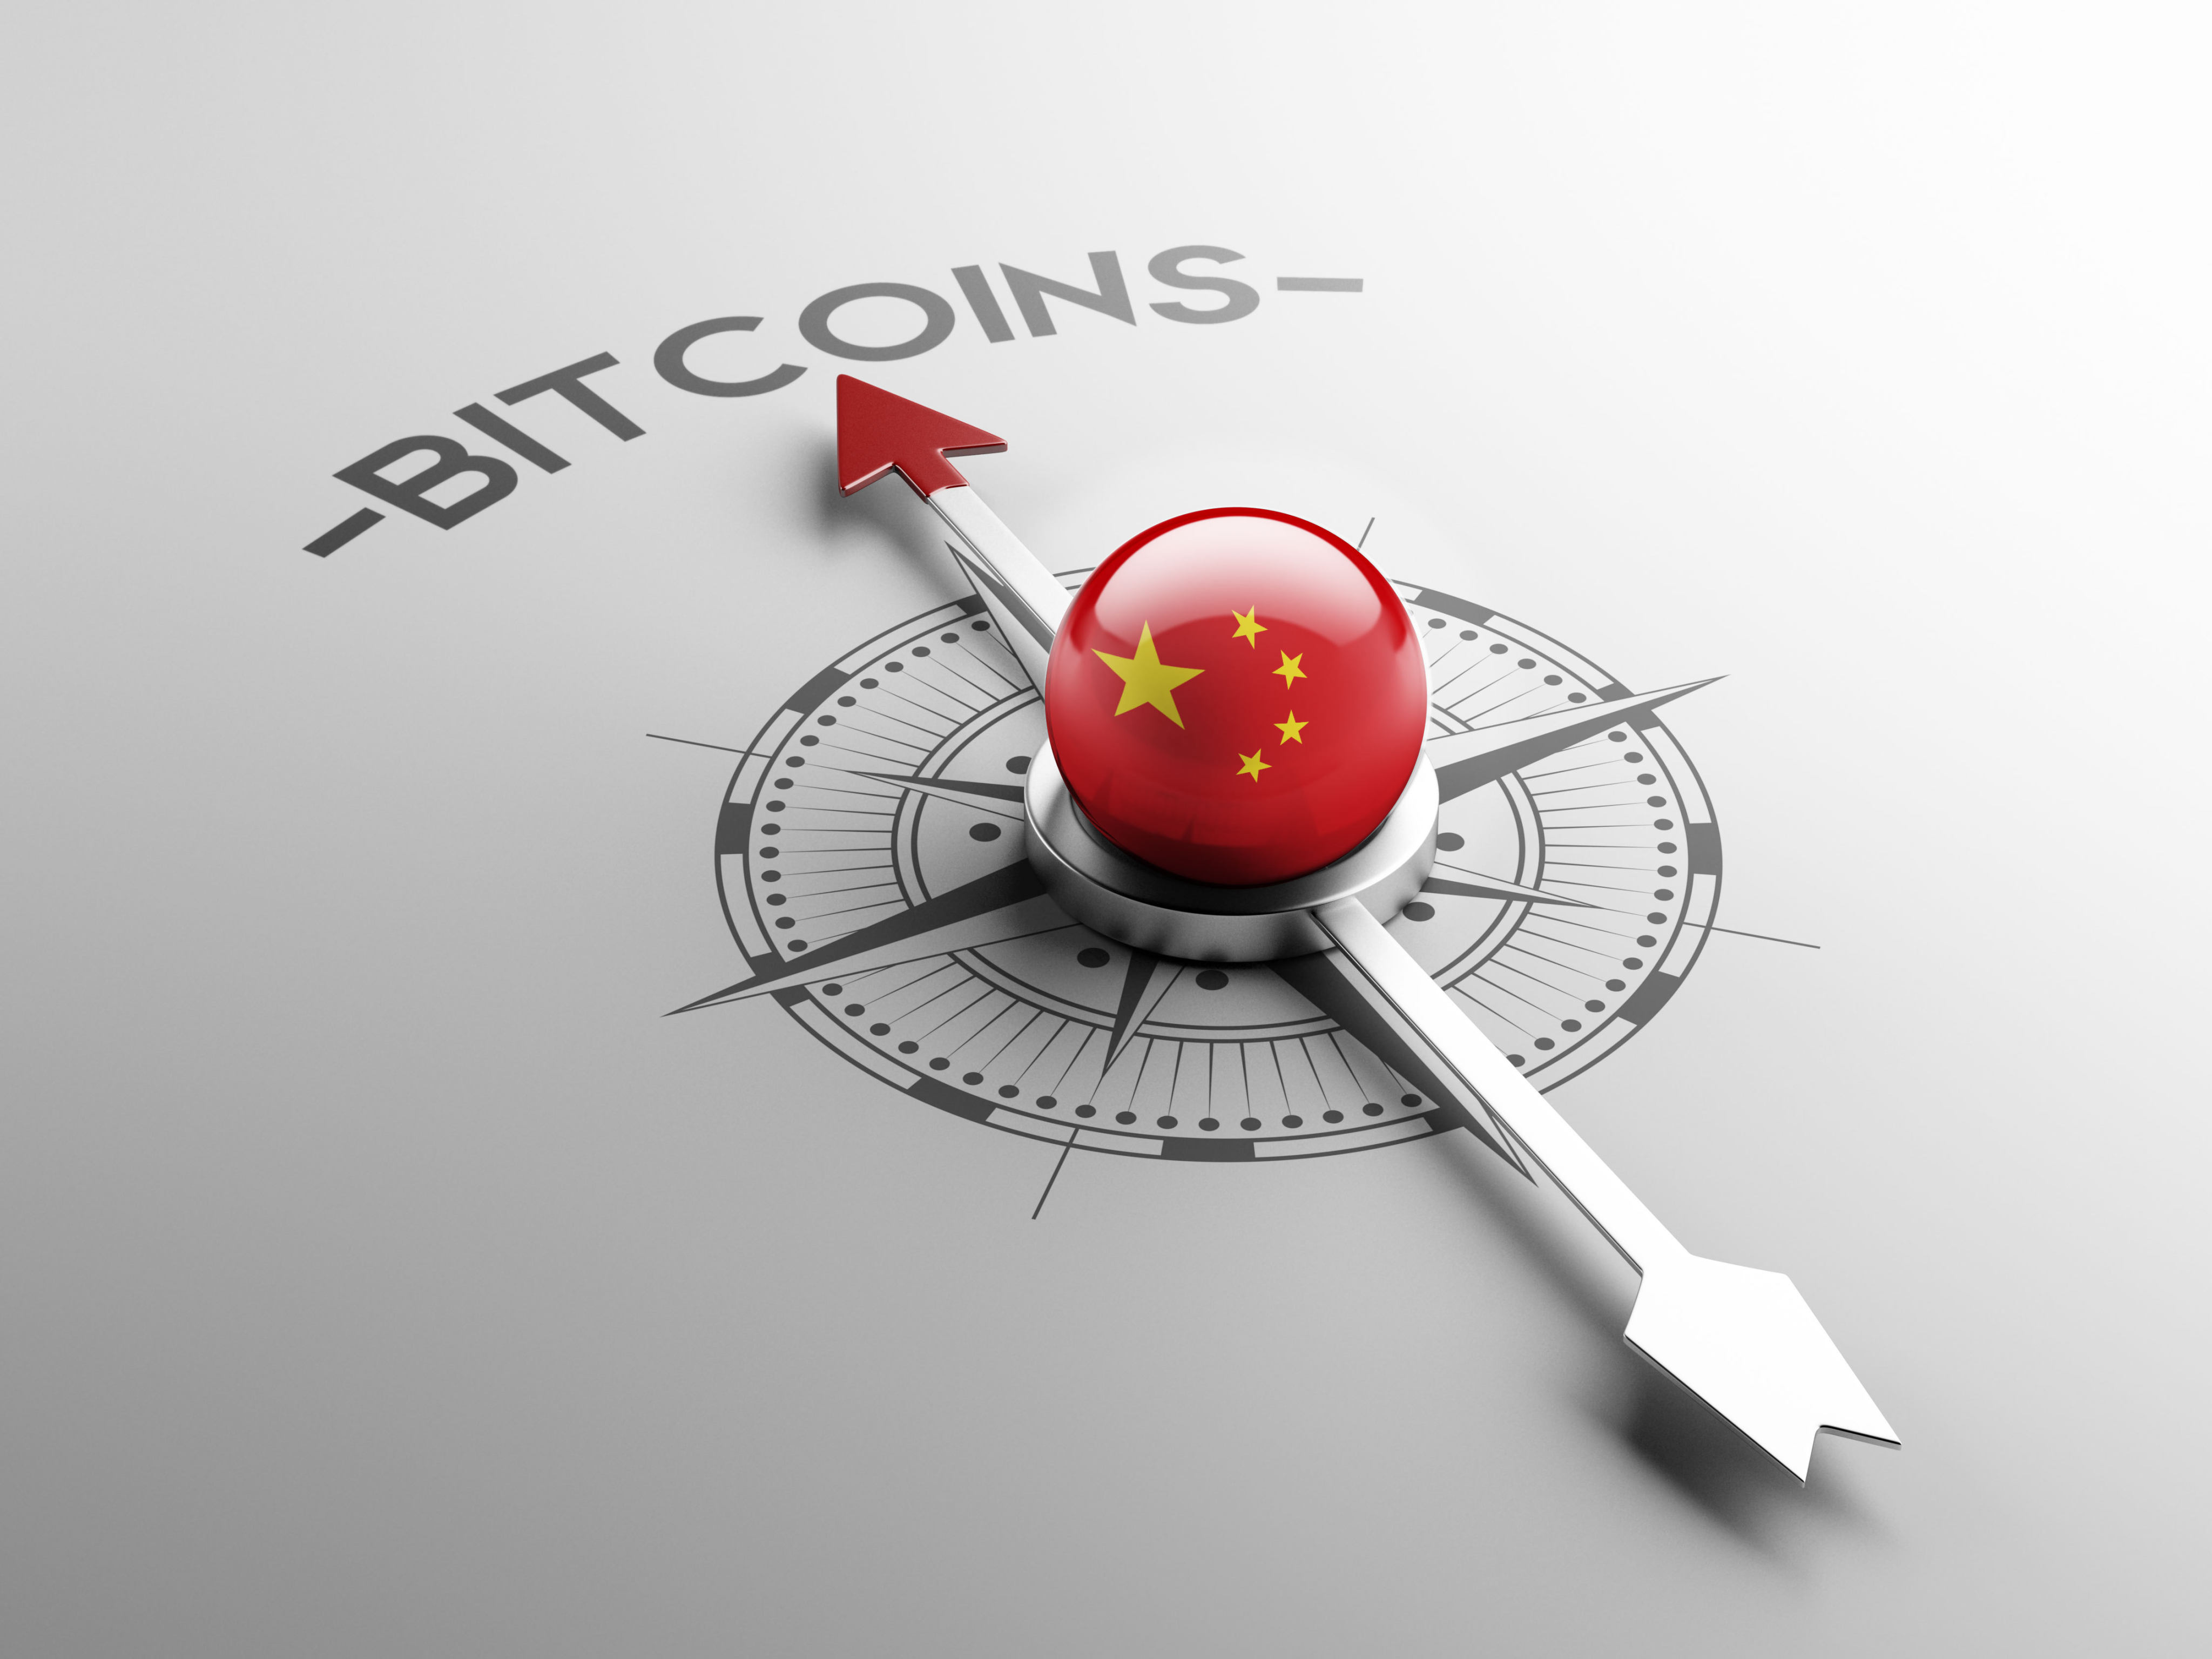 Chinese social media’s increased interest in bitcoin reflects how a community of cryptocurrency enthusiasts on the mainland continues to thrive, despite a sweeping government ban. Photo: Shutterstock